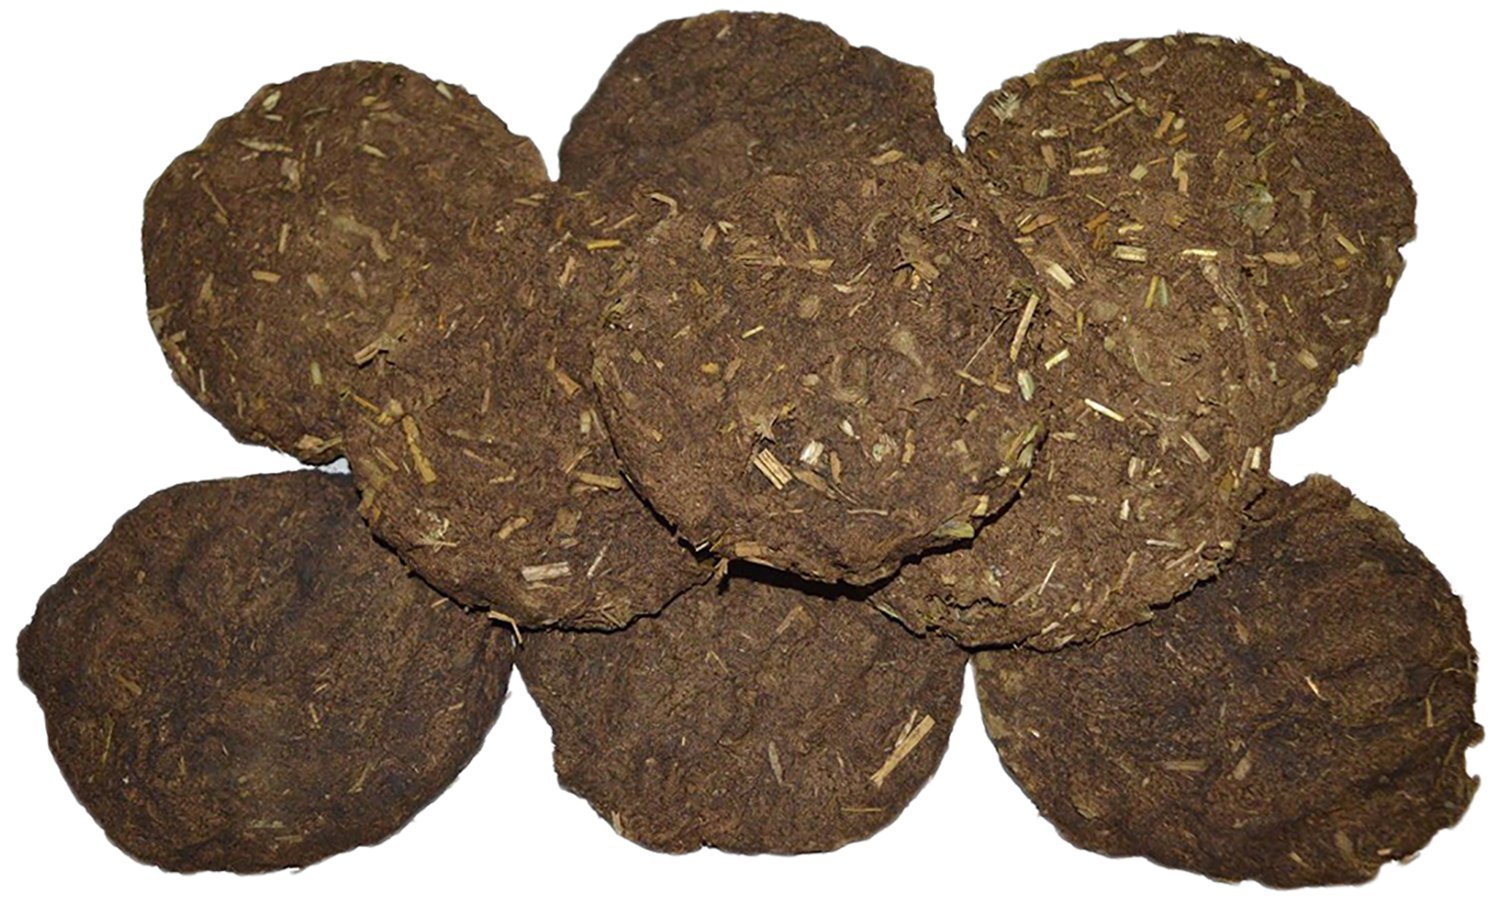 How to use Cow Dung Cakes for plants? – TrustBasket